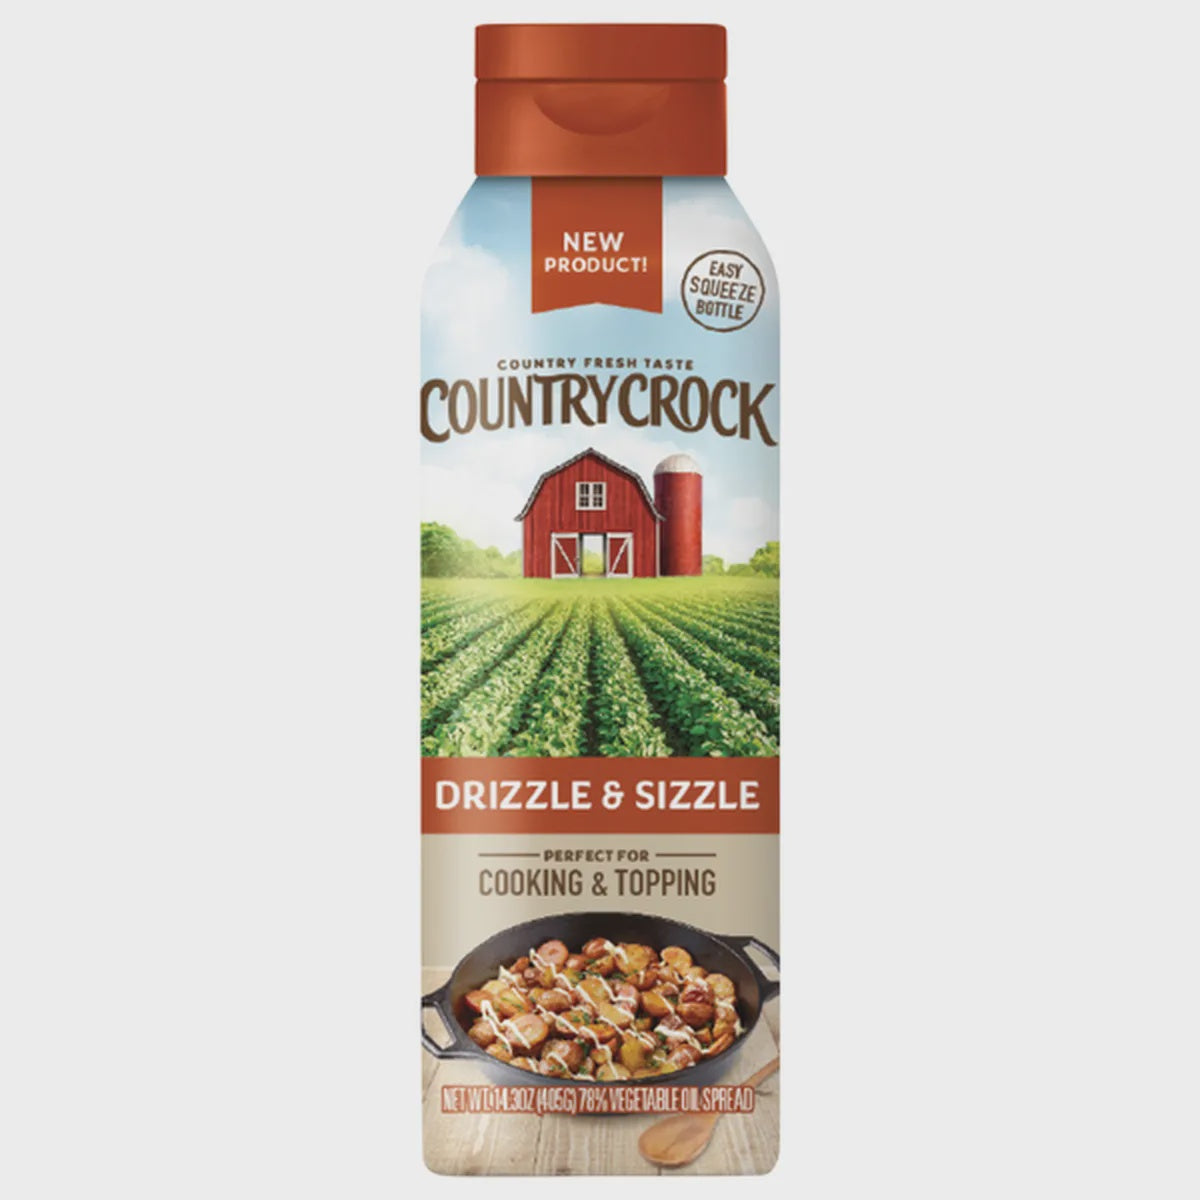 Country Crock Drizzle & Sizzle 14oz